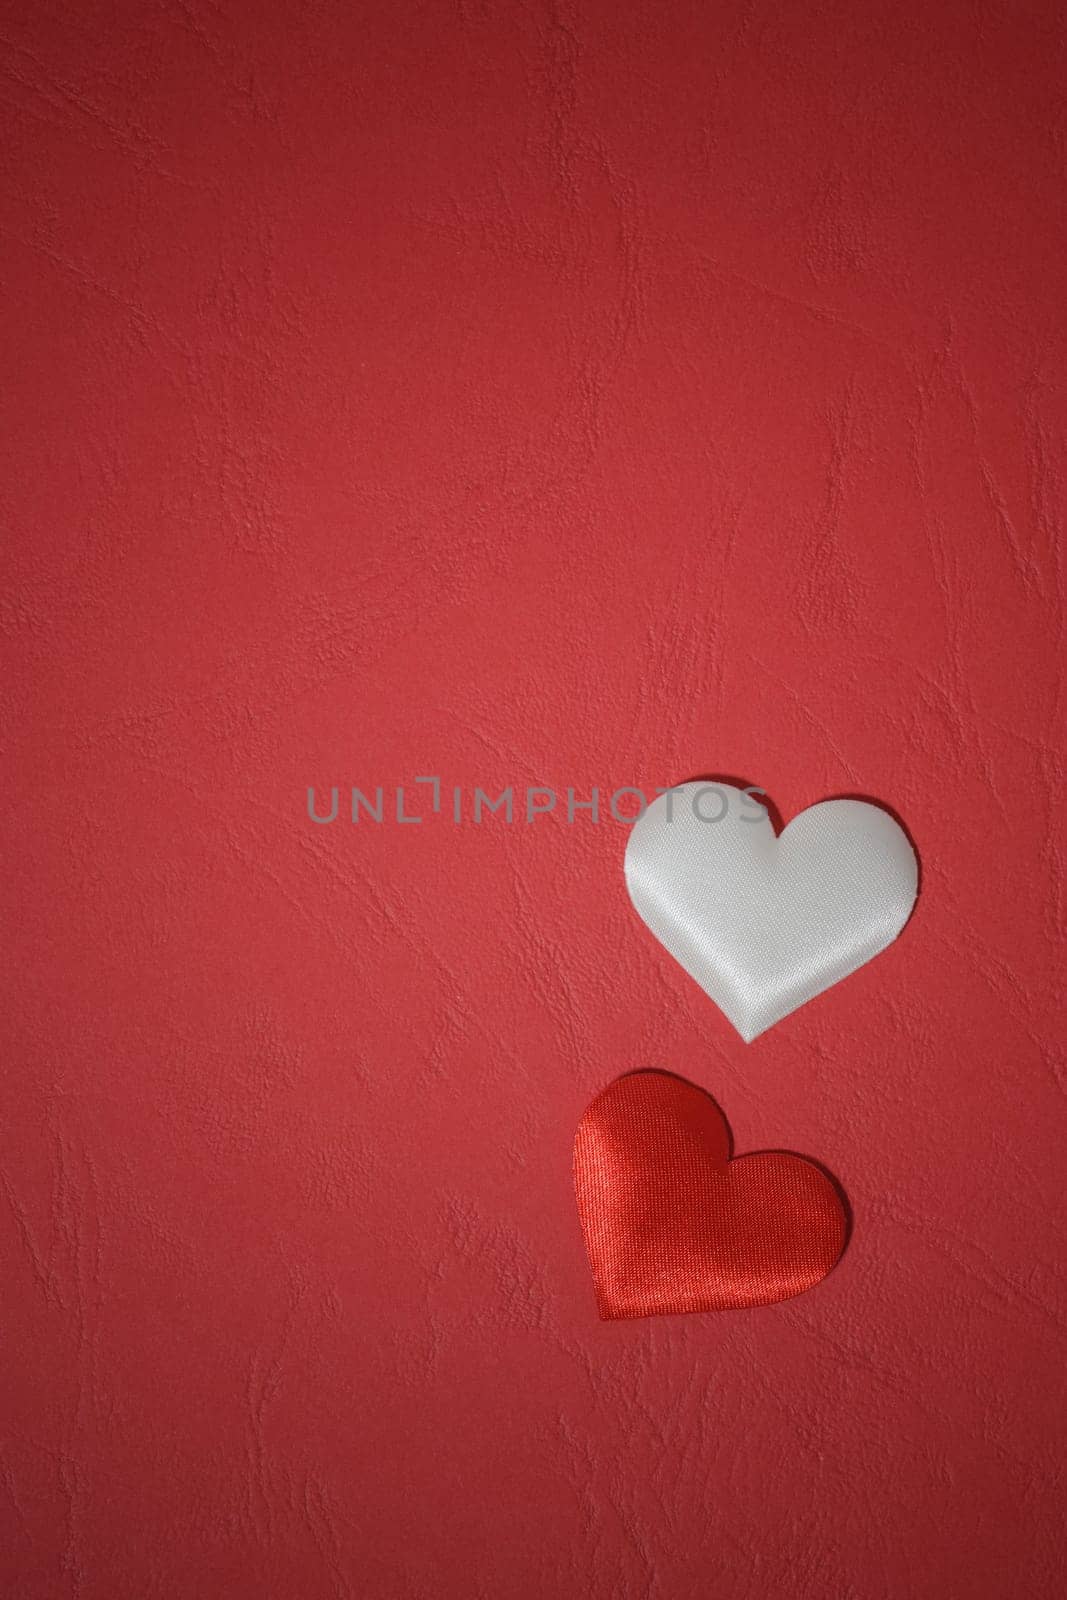 Love concept. Two hearts on a red background